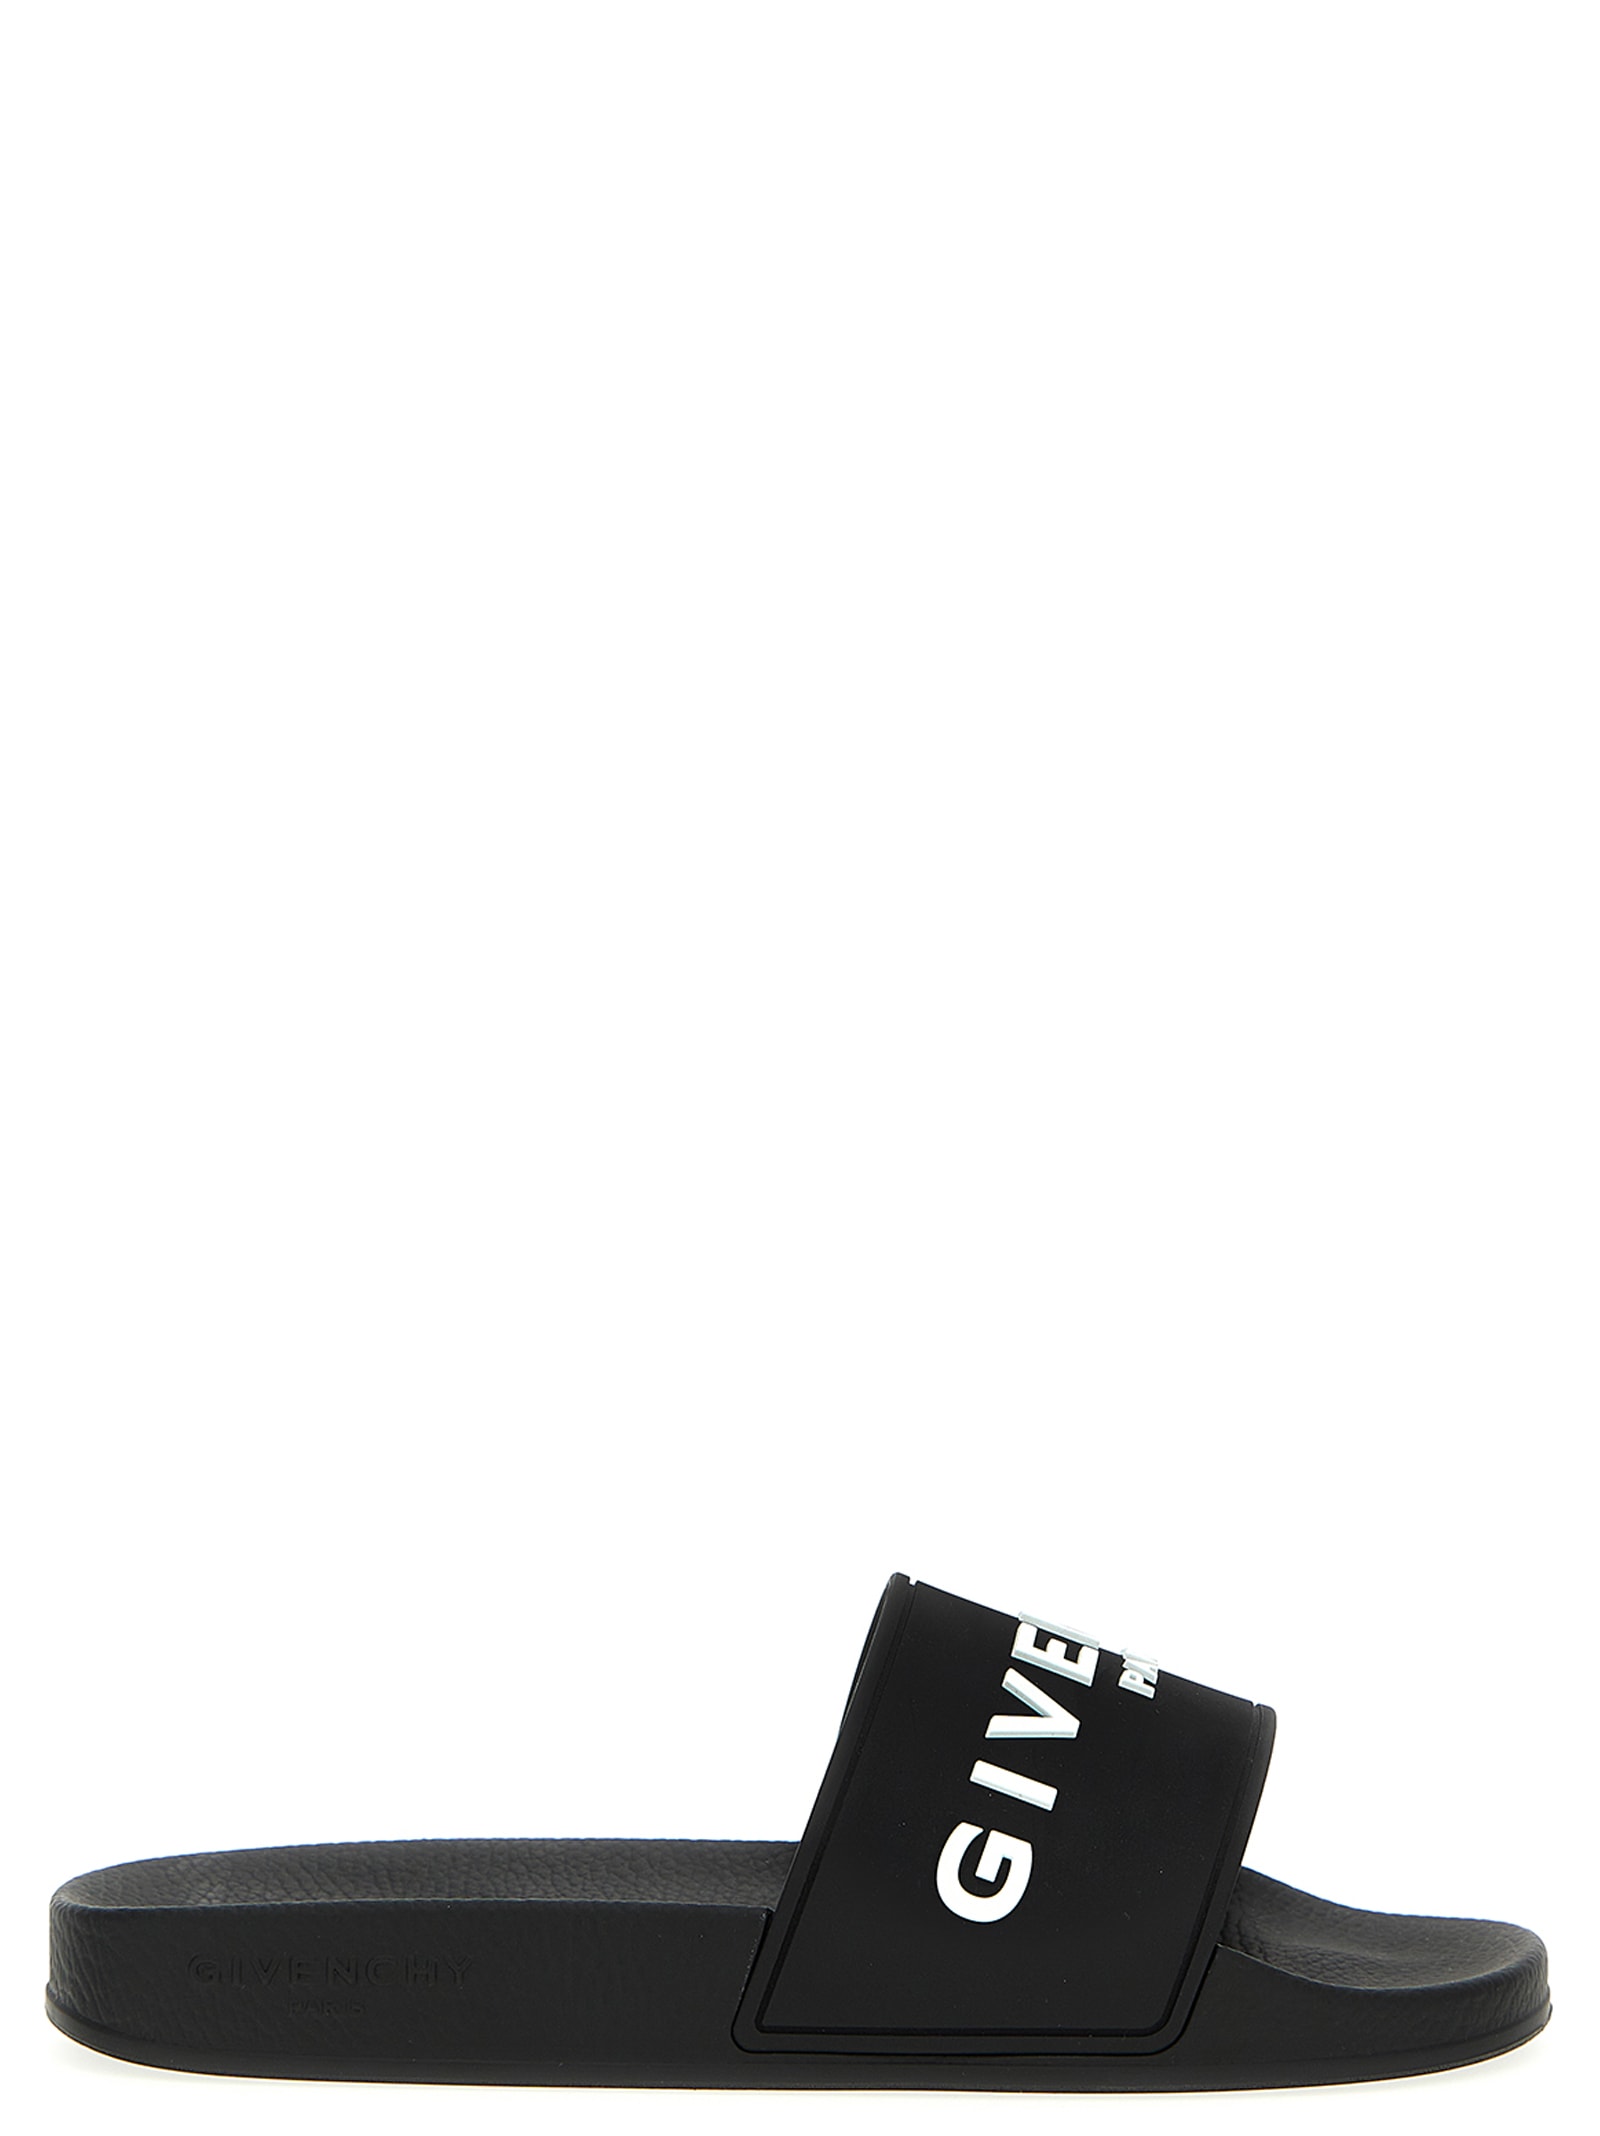 Givenchy Plage Capsule Slides In White/black